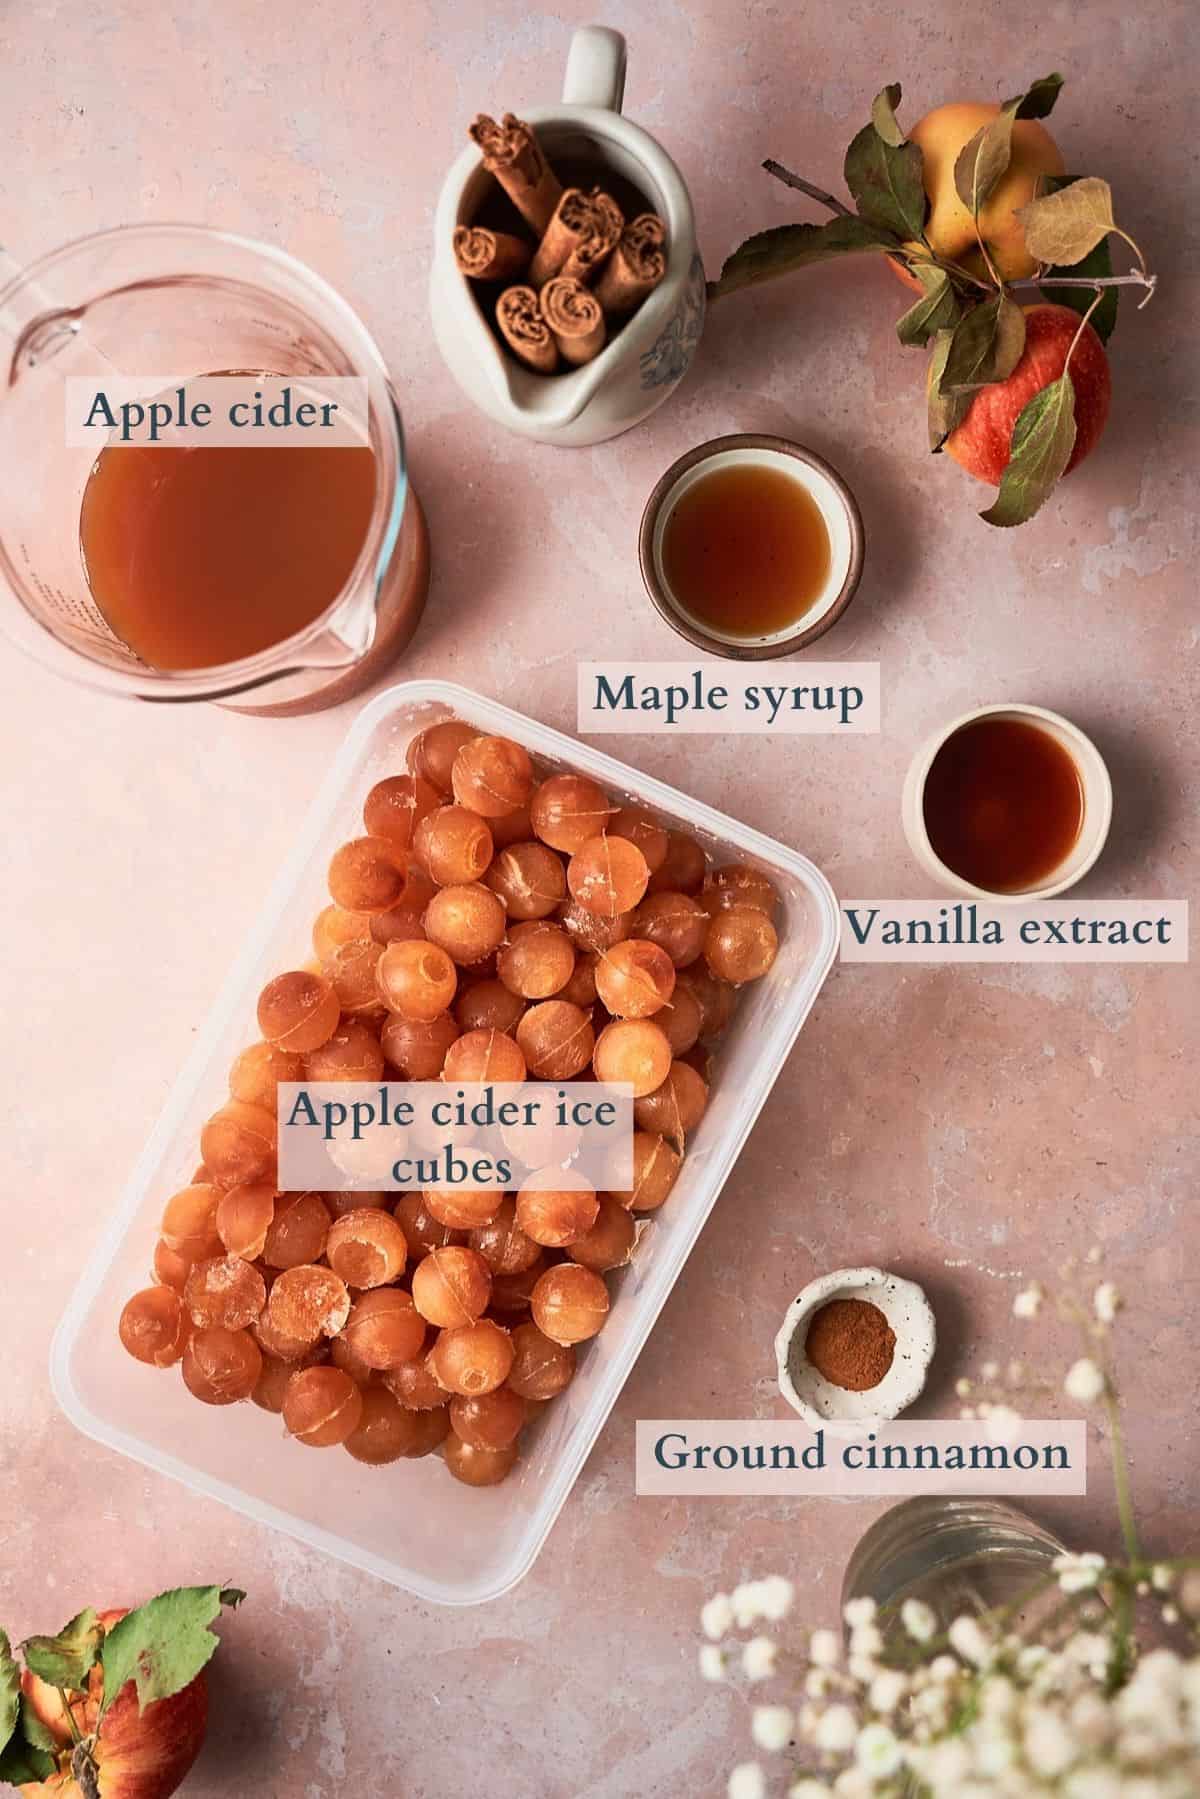 Ingredients to make an apple cider slushie laid out on a table and labeled to denote each ingredient. 